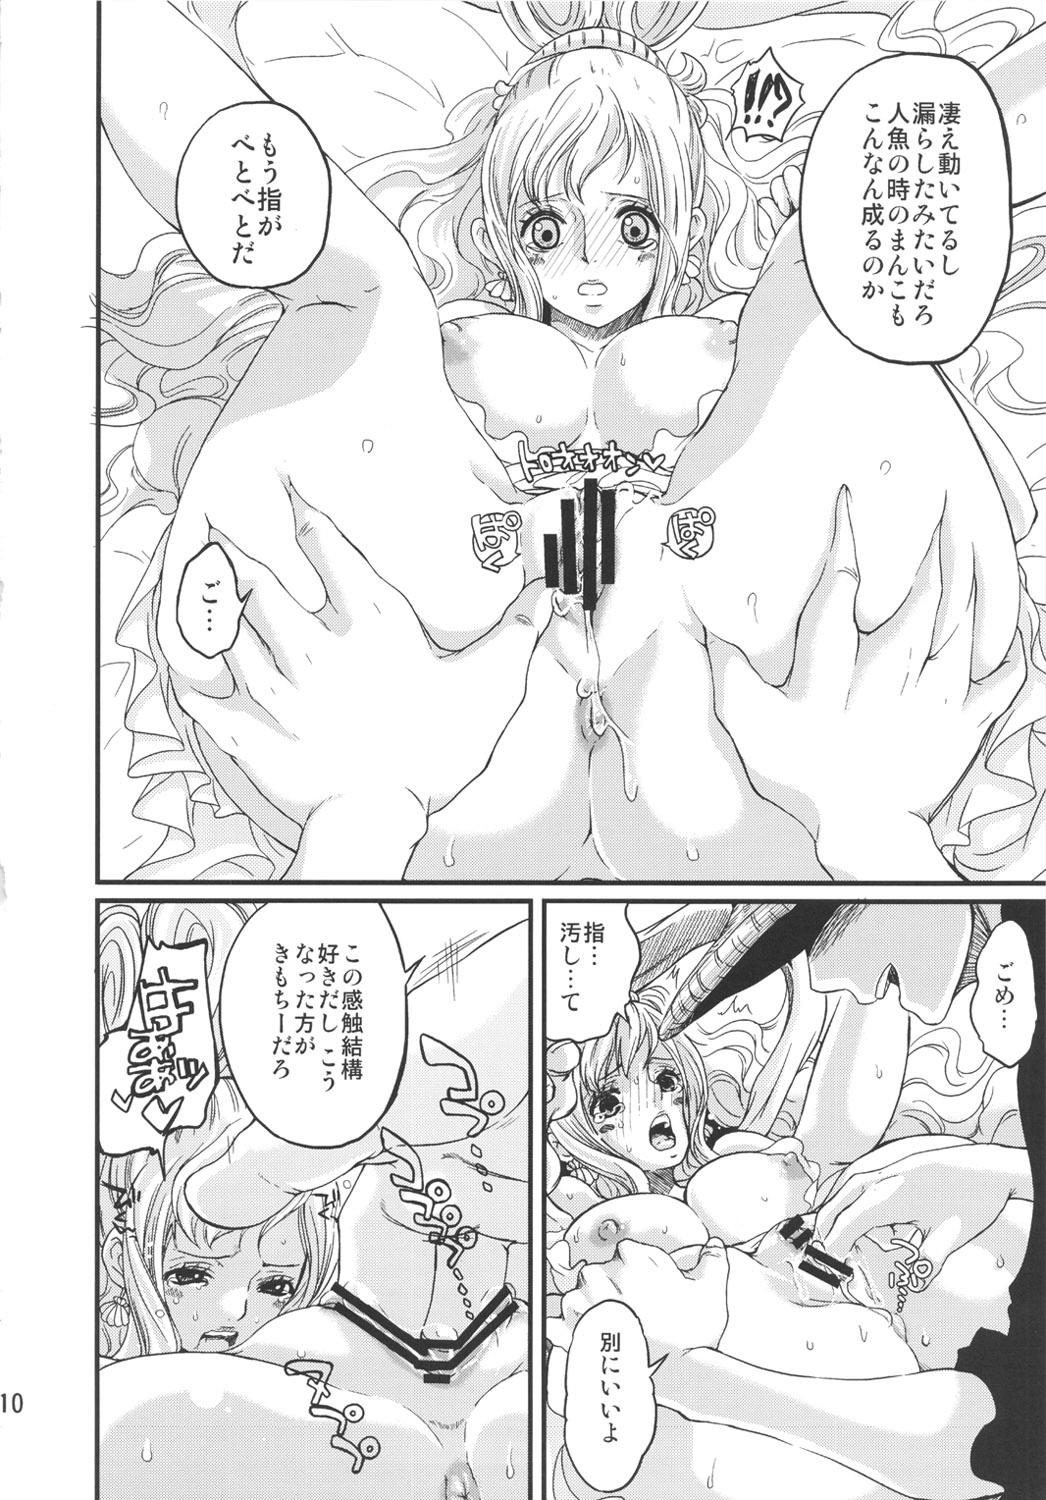 Story Ningyohime - One piece Gay Medical - Page 10